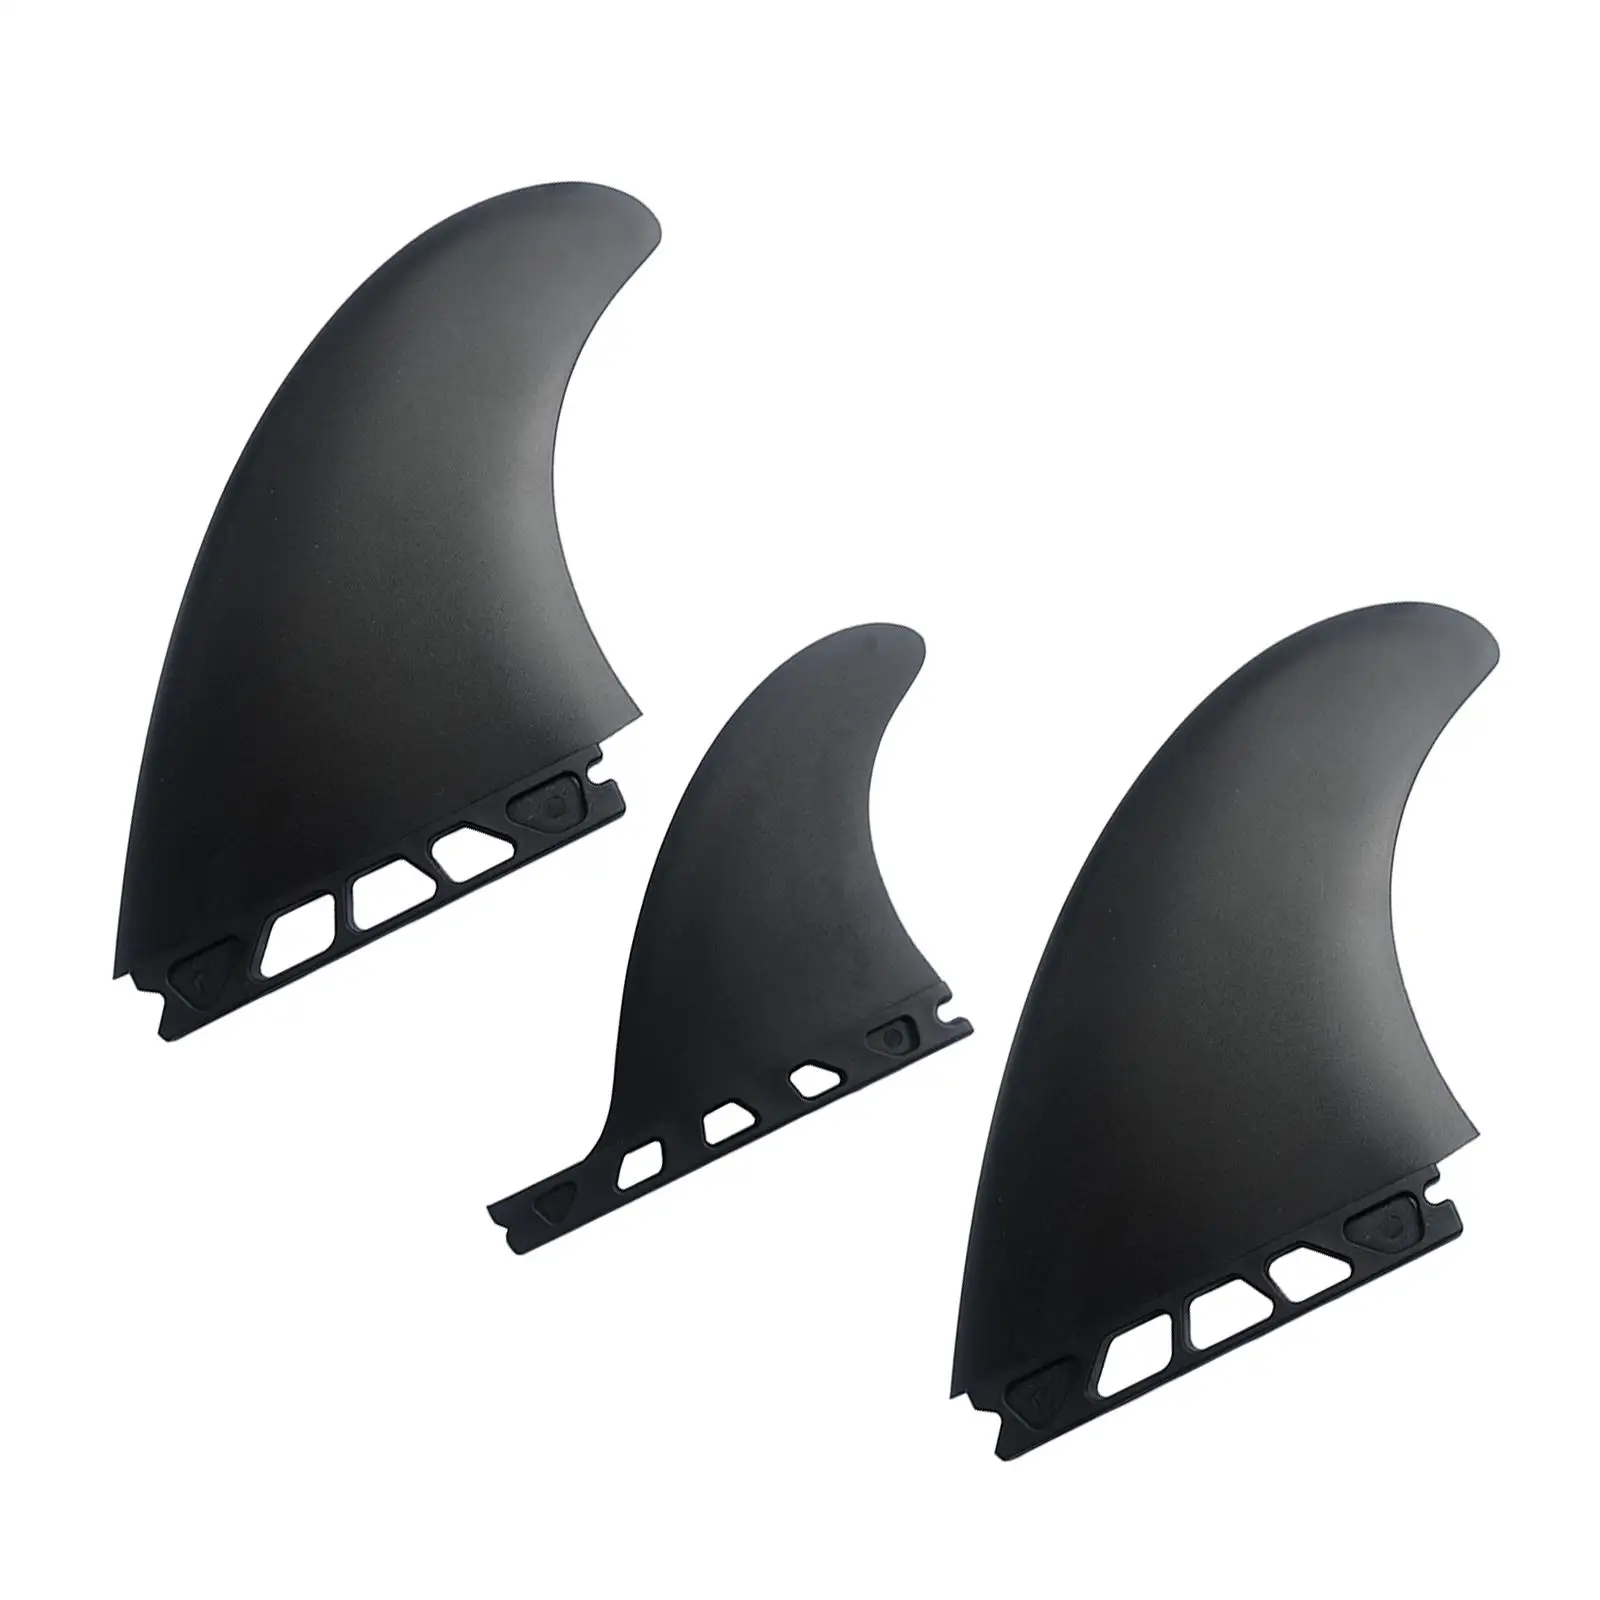 3x Surfing Fin Detachable Quick Release Surfboard Fins Accessory